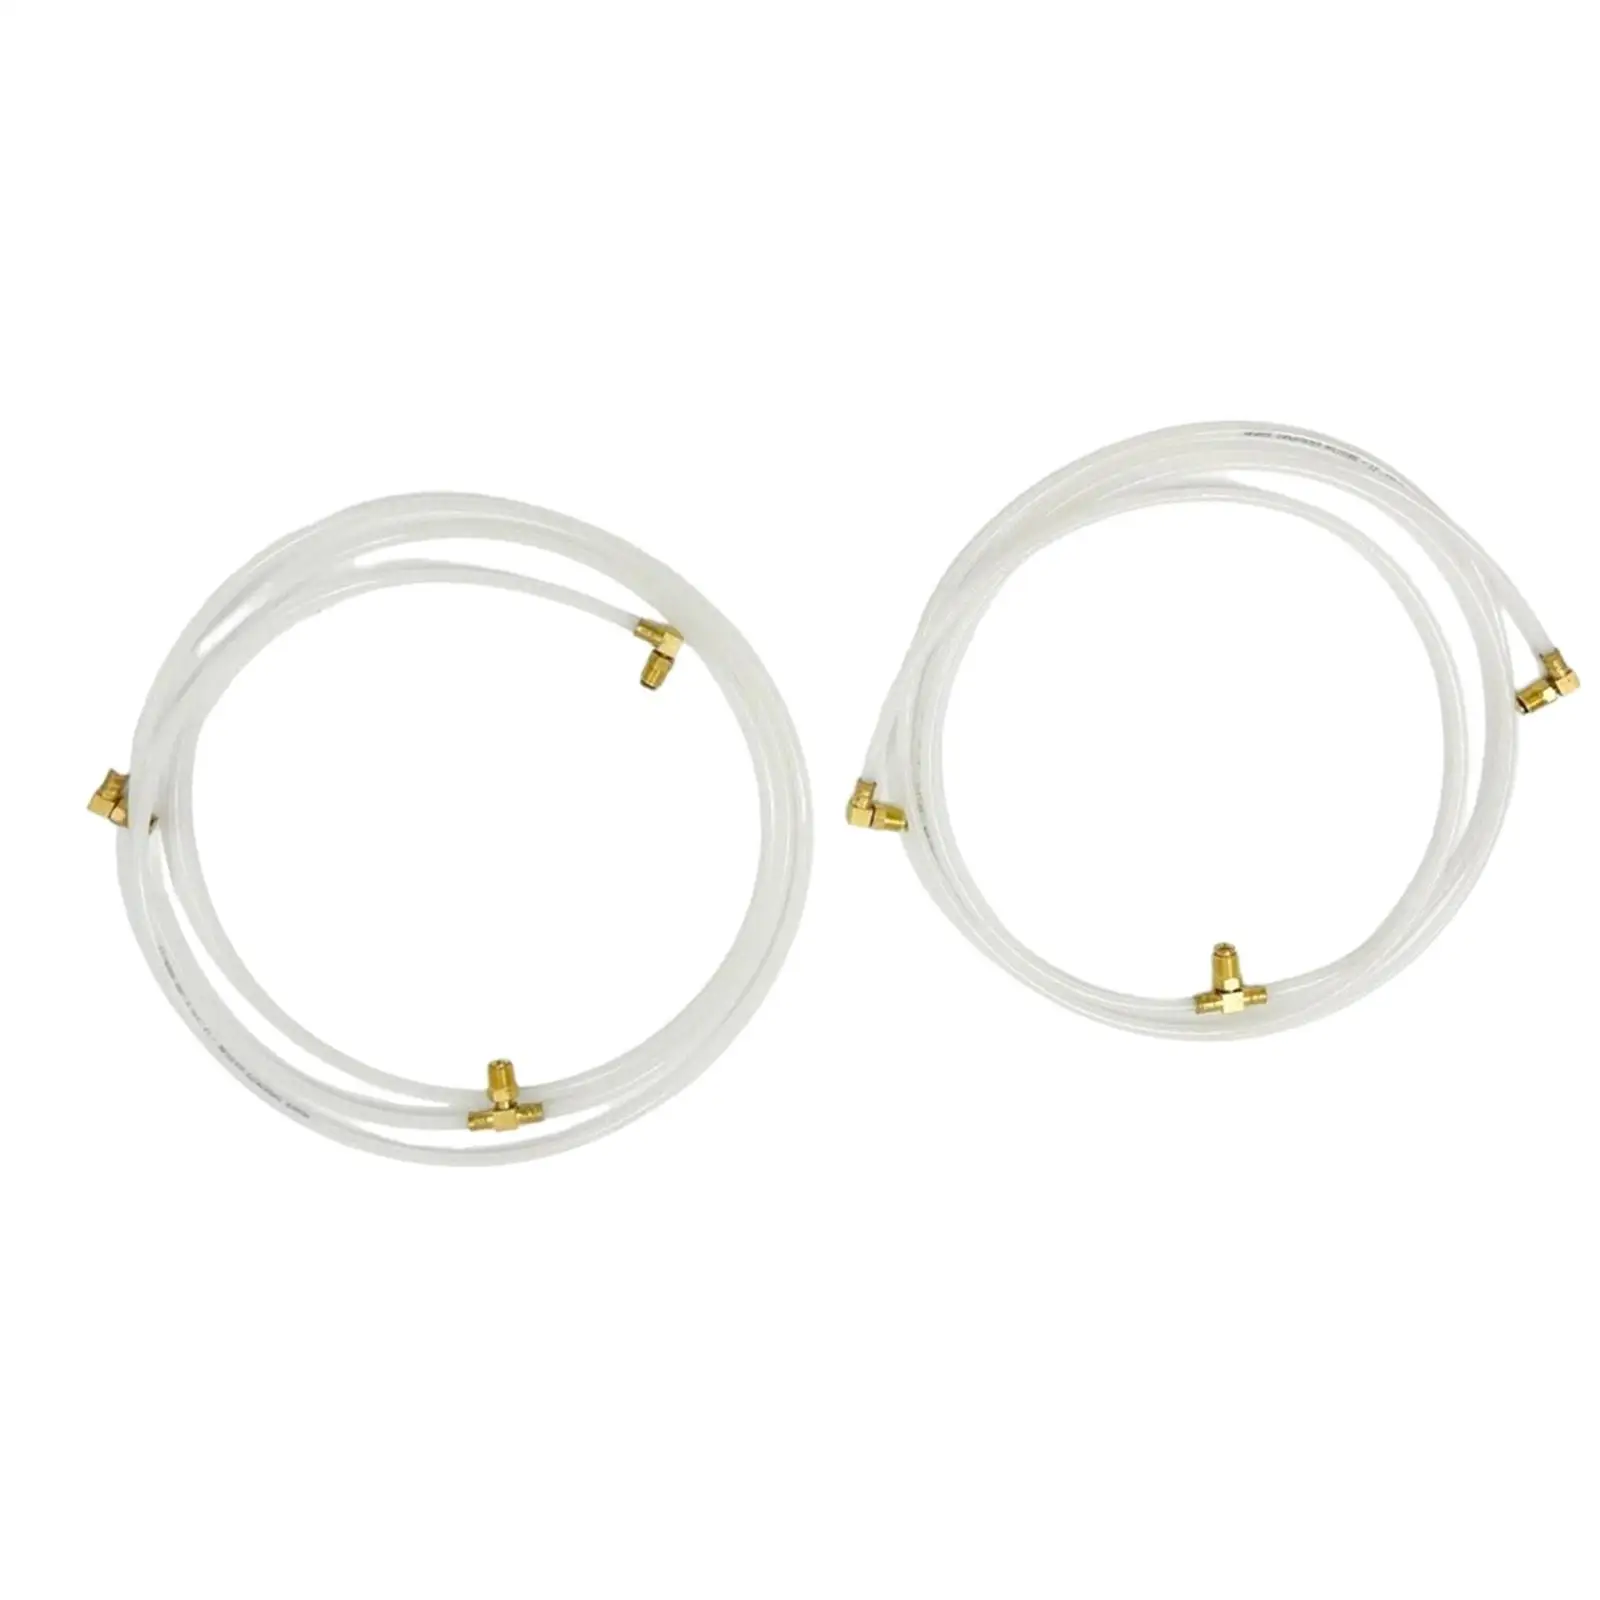 Convertible Top Hydraulic Fluid Hose Line Pair Hoses Ho-white-set for Chevrolet Chevy II Corvair Impala Quality